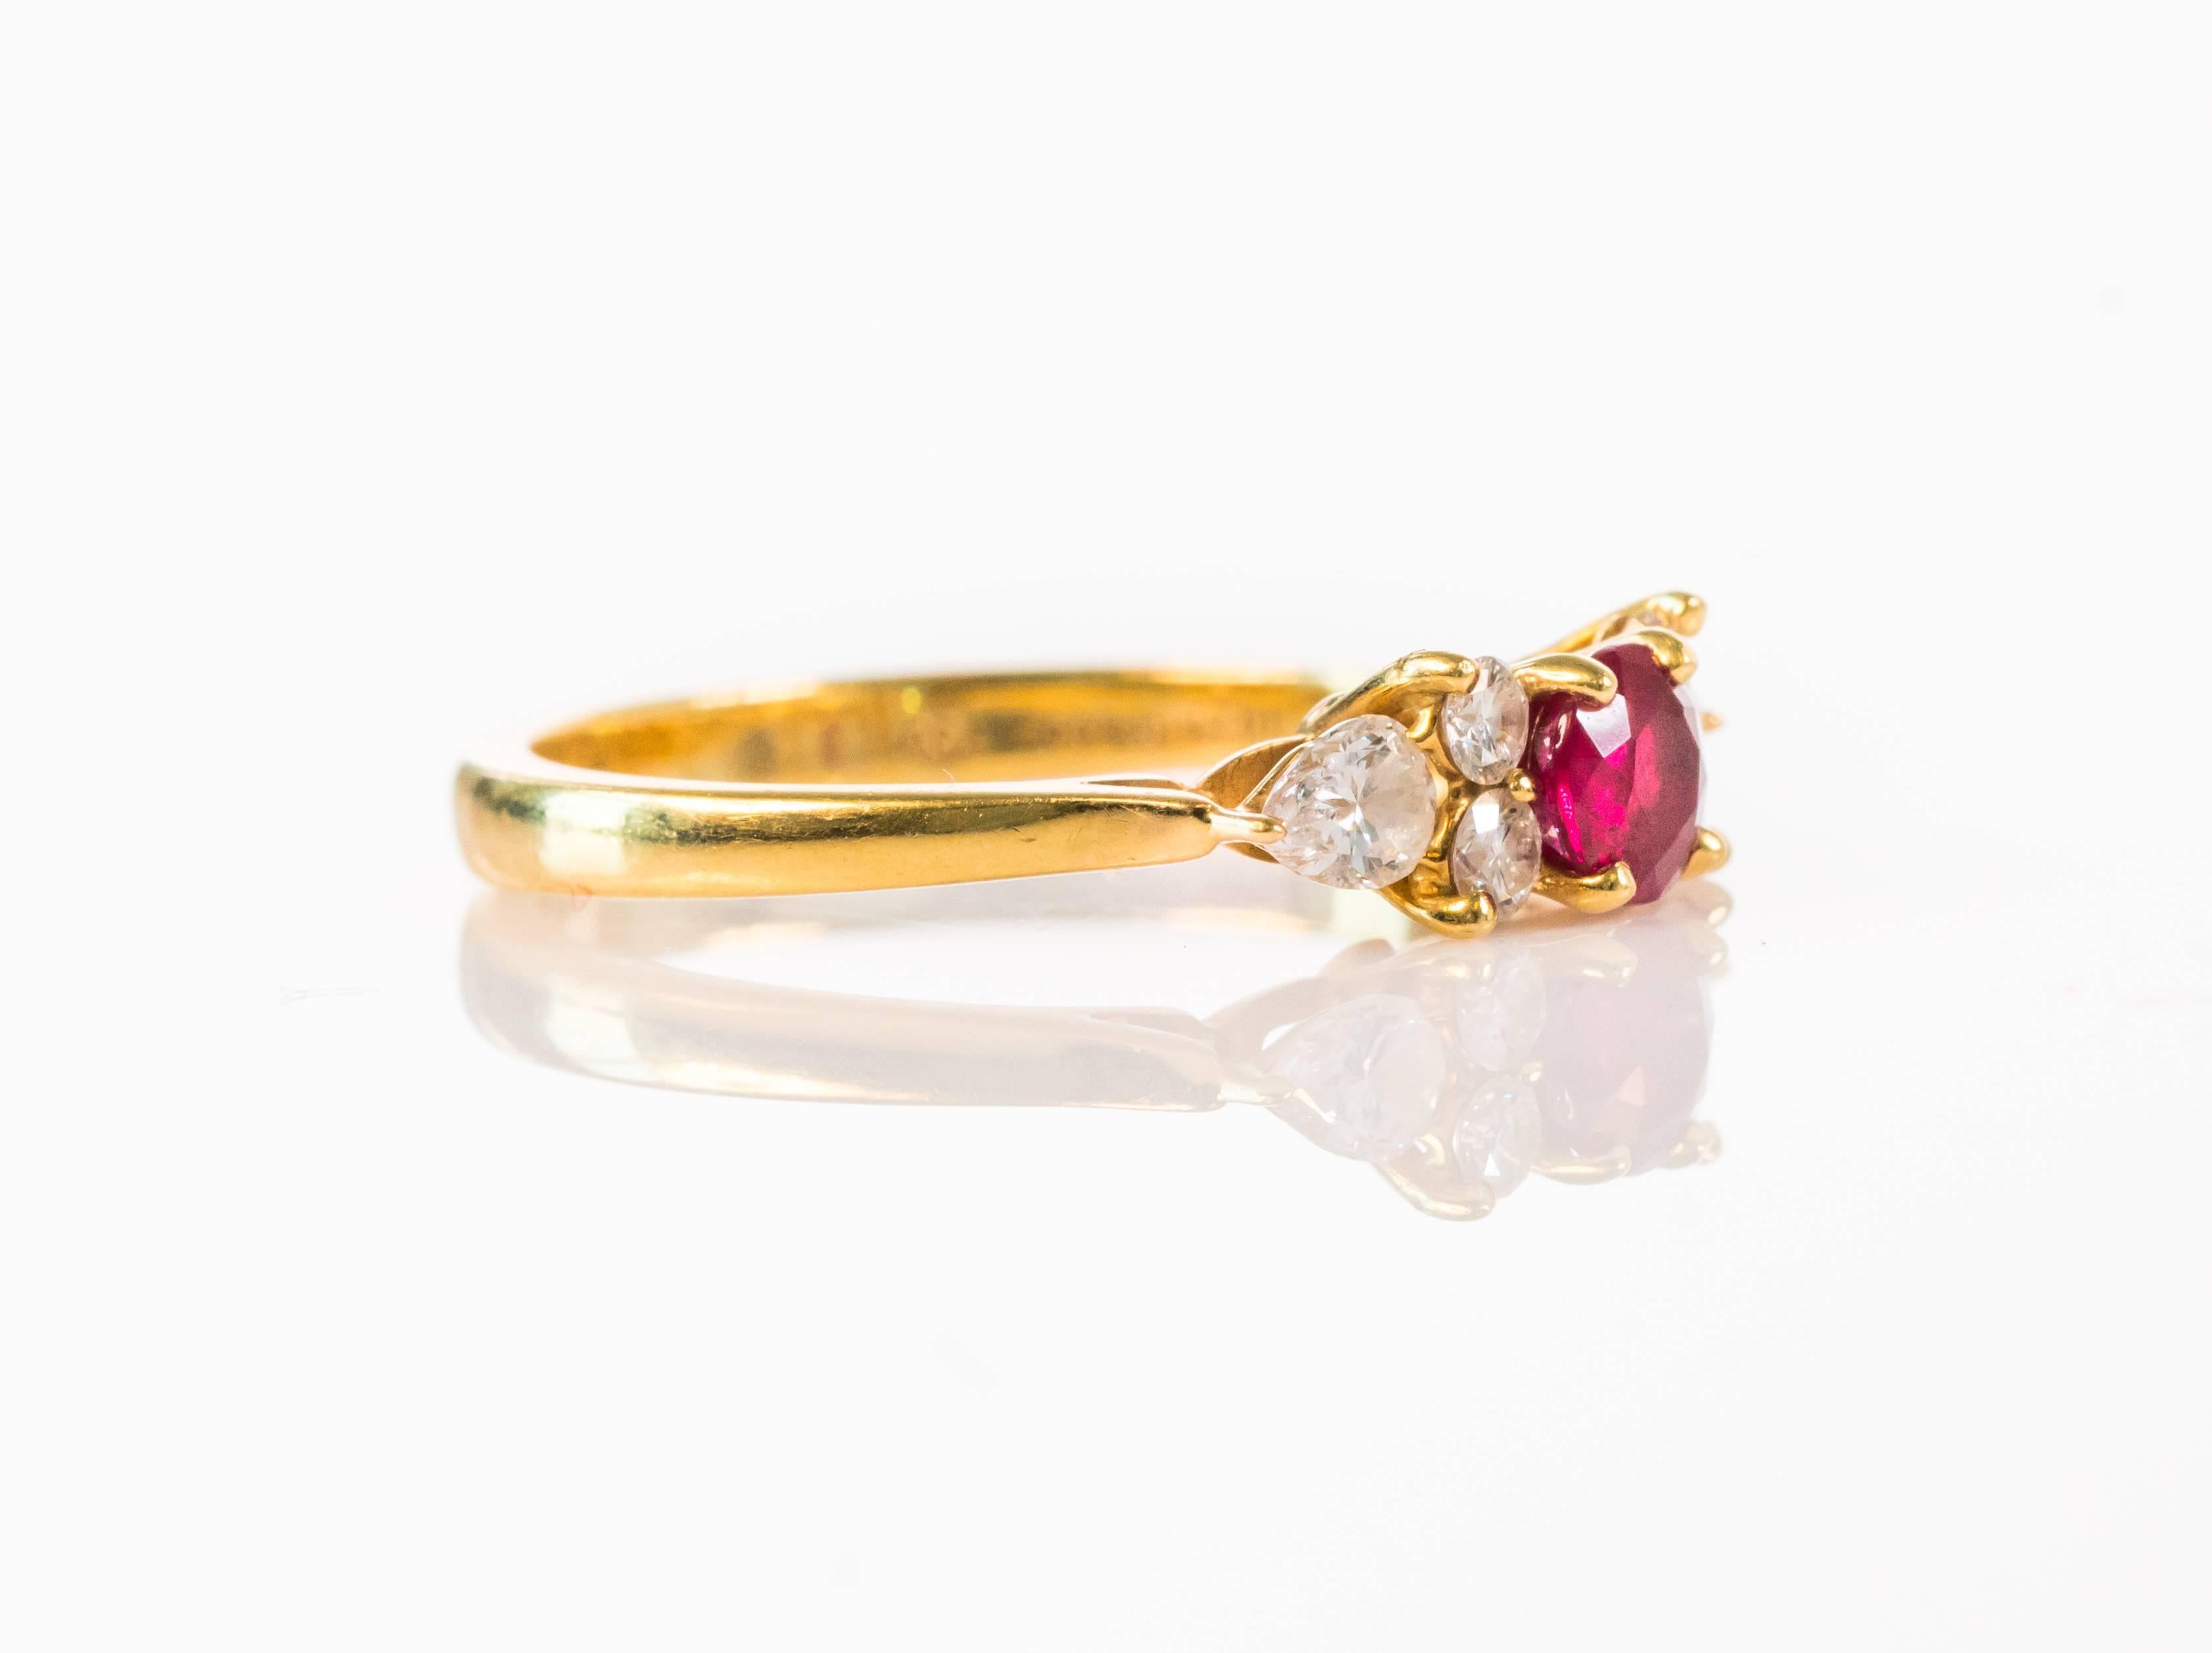 This vintage 1980s Tiffany and Co prong set Red Ruby, Diamond and 18 Karat Yellow Gold ring makes a perfect gift for your favorite sweetheart! The .40 carat red ruby is flanked by 4 round brilliant diamonds and 2 pear-shaped diamonds. This ring fits